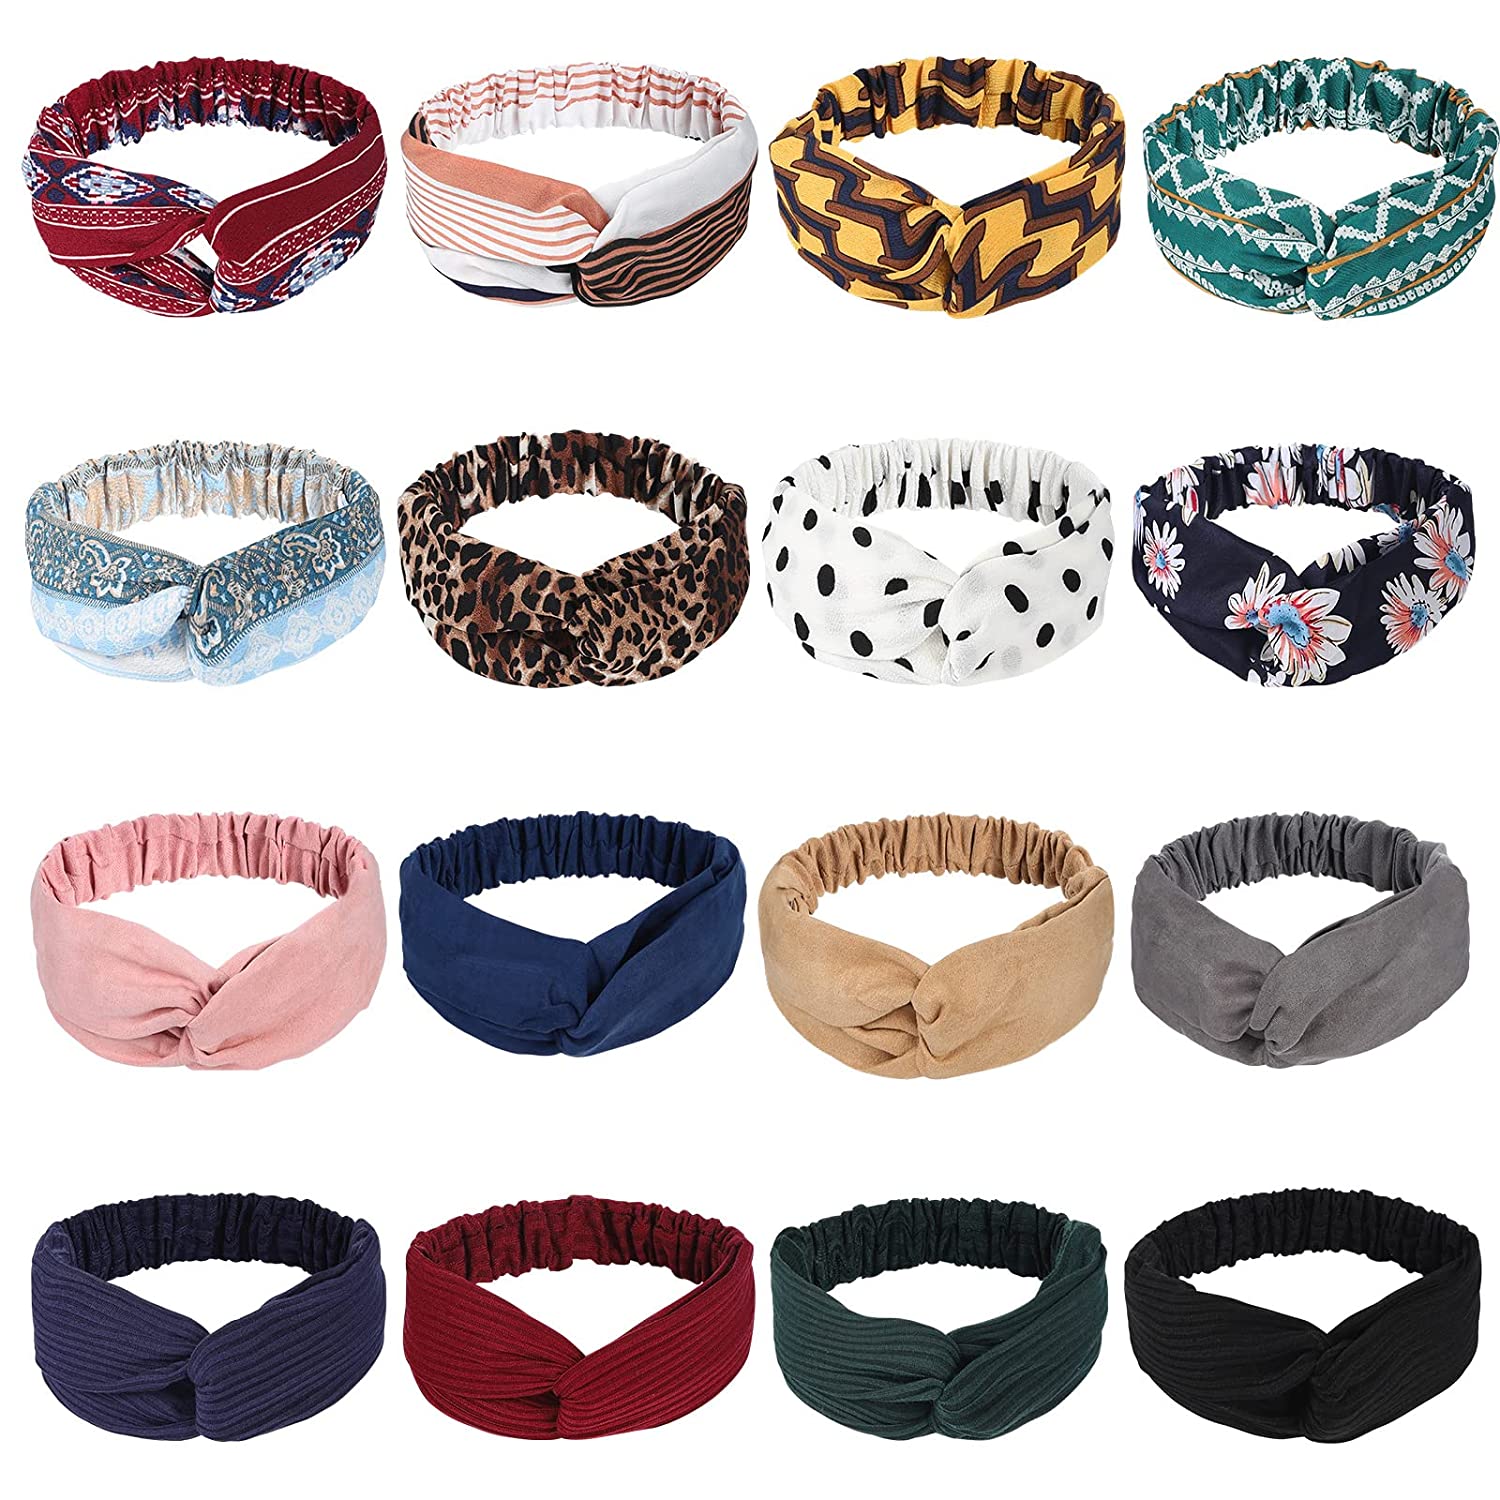 Meartchy Elastic Twist Style Headbands For Women, 16-Piece